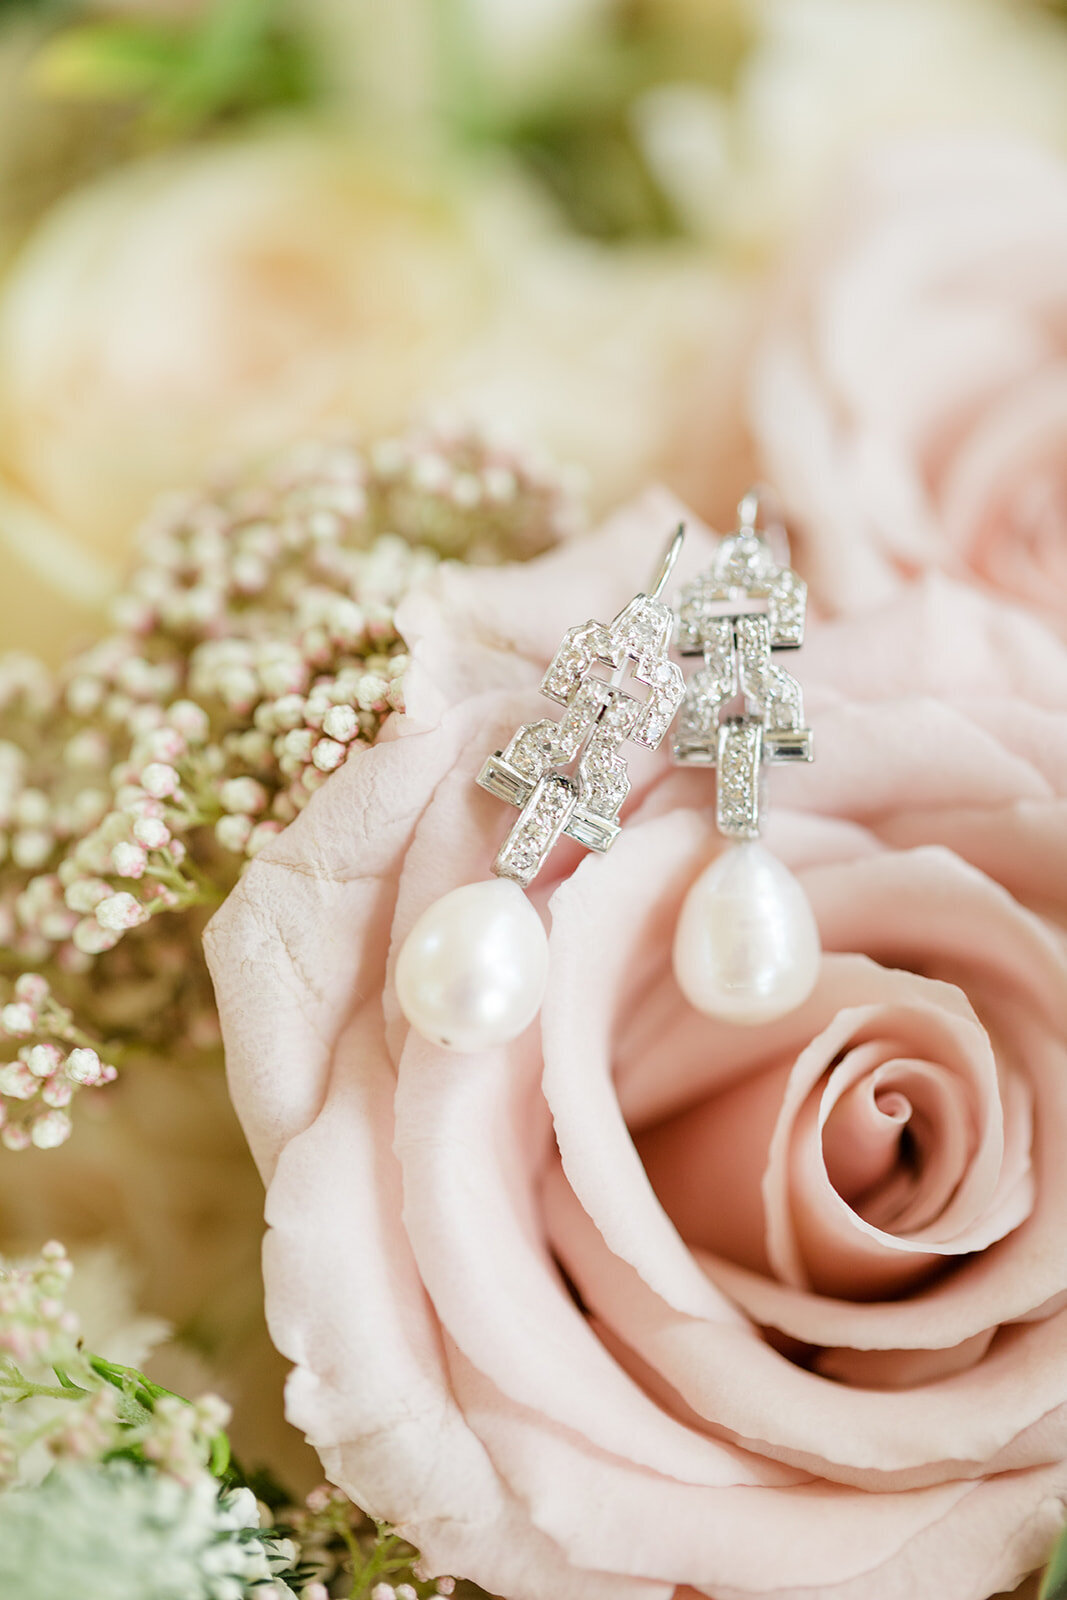 Earrings on a rose; bridal details